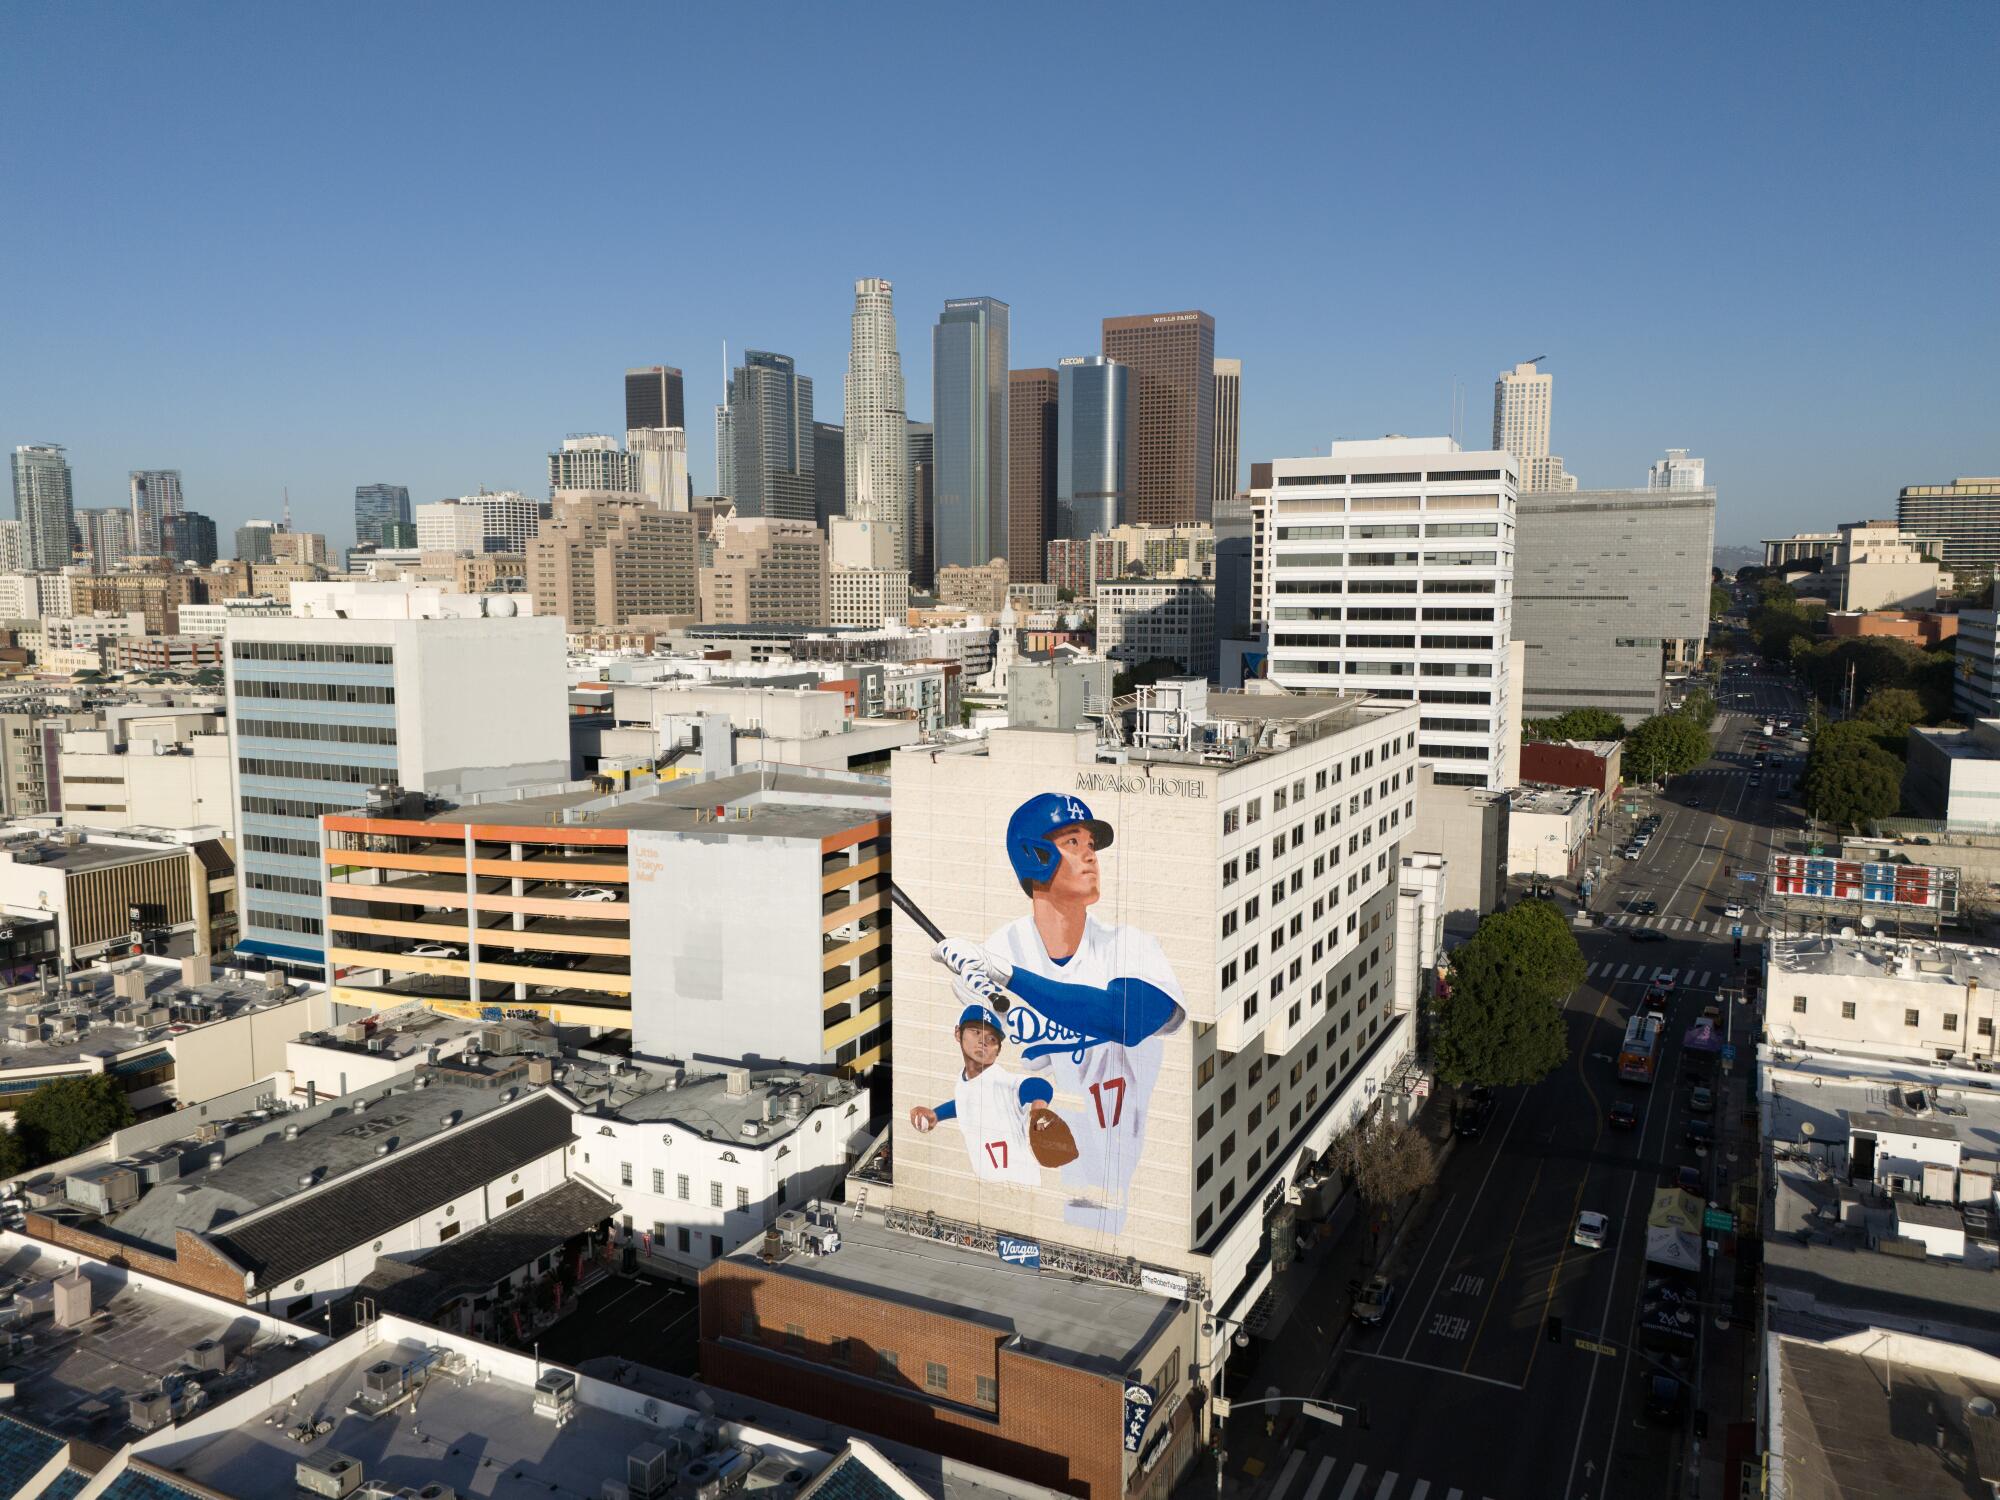 A mural of Shohei Ohtani graces the side of the Miyako Hotel in Little Tokyo.